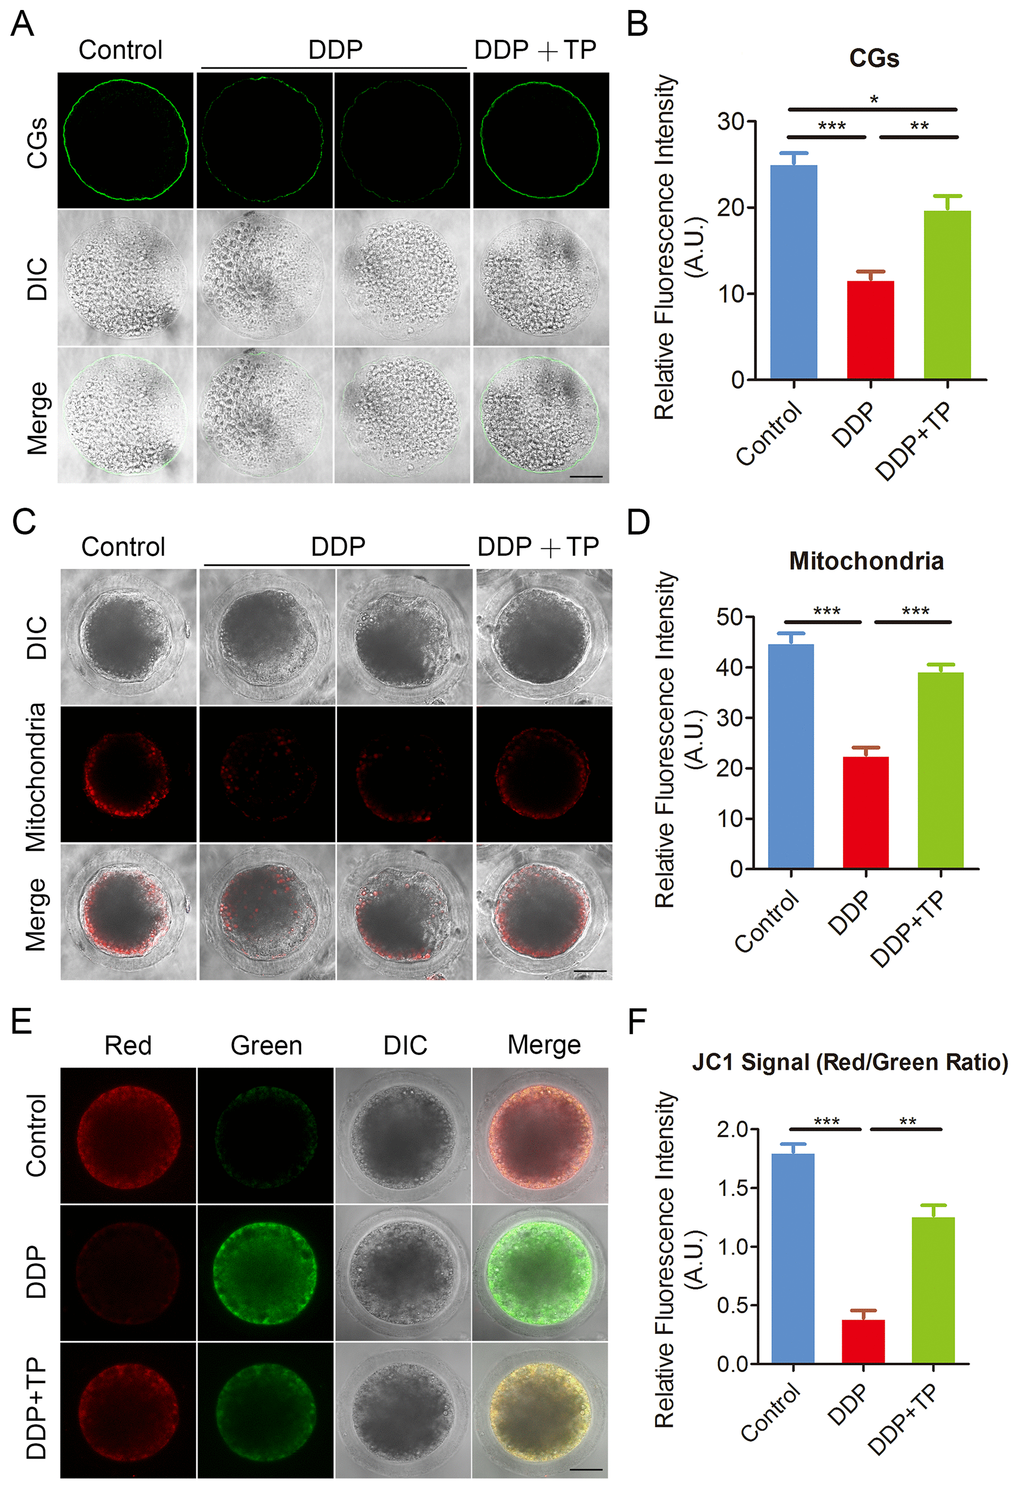 Effects of TP on the distribution of CGs and mitochondria in DDP-exposed porcine oocytes. (A) Representative images of CGs localization in control, DDP-exposed and TP-supplemented oocytes. Scale bar, 40 μm. (B) The fluorescence intensity of cortical granules was measured in control, DDP-exposed and TP-supplemented oocytes. (C) Representative images of mitochondria in control, DDP-exposed and TP-supplemented oocytes. Scale bar, 35 μm. (D) The immunofluorescence intensity of mitochondrion signals was recorded in control, DDP-exposed and TP-supplemented oocytes. (E) Mitochondrial membrane potential (ΔΨm) was detected by JC-1 in control, DDP-exposed and TP-supplemented oocytes (Red, high ΔΨm; Green, low ΔΨm). (F) The ratio of red and green fluorescence intensity was recorded in control, DDP-exposed and TP-supplemented oocytes. Data were presented as mean percentage (mean ± SEM) of at least three independent experiments. *P 